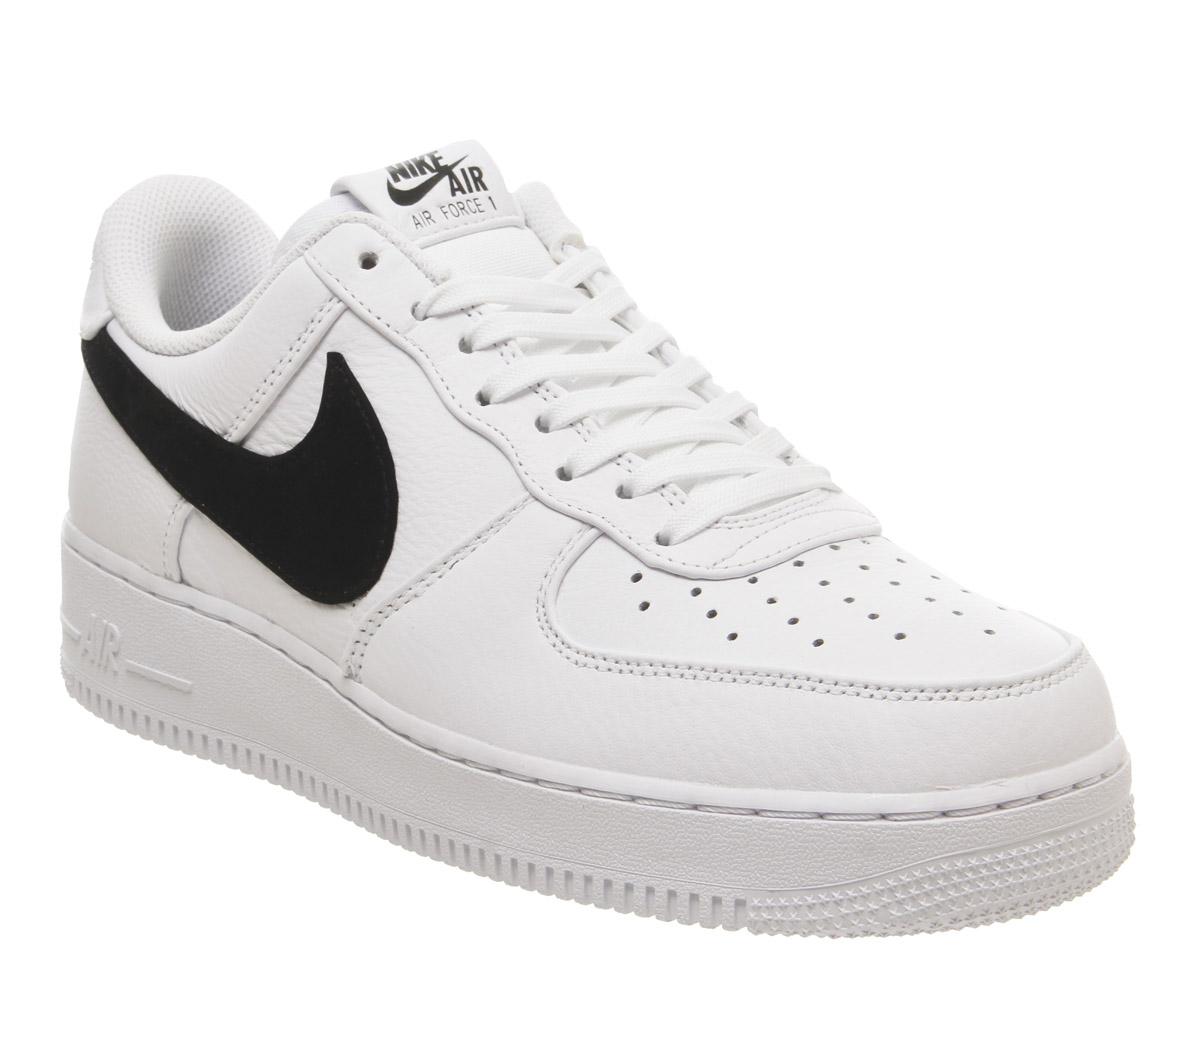 Nike Air Force 1 07 Trainers White Black Prm 2 - His trainers